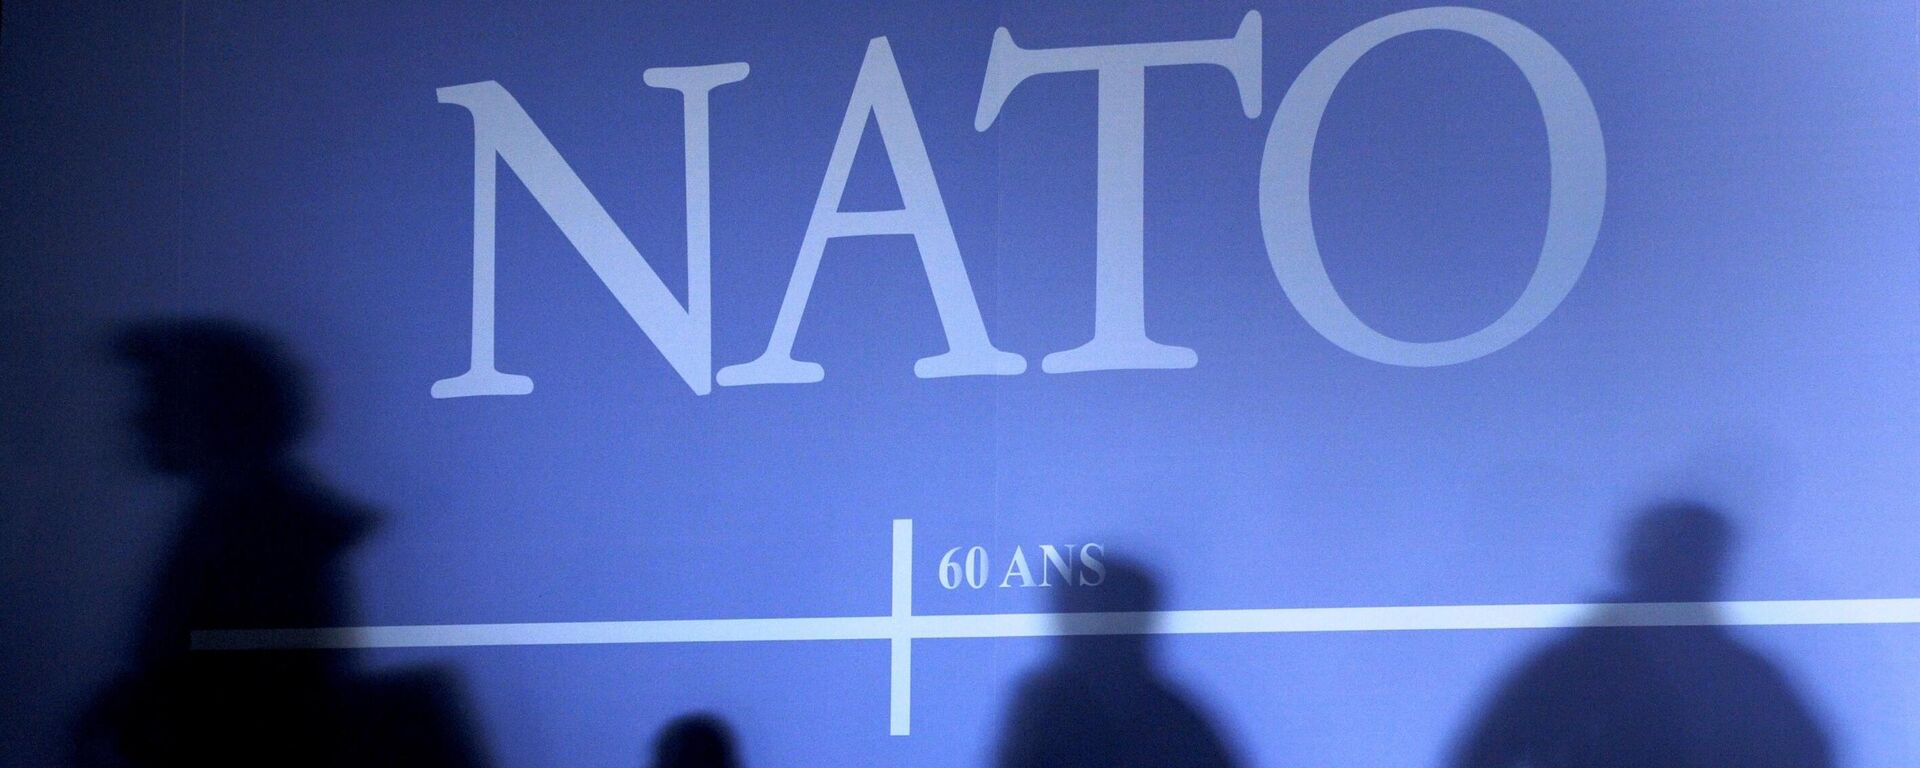 This April 2, 2009 file photo shows shadows cast on a wall decorated with the NATO logo and flags of NATO countries in Strasbourg, eastern France, before the start of the NATO summit which marked the organisation's 60th anniversary.  - Sputnik International, 1920, 27.03.2023